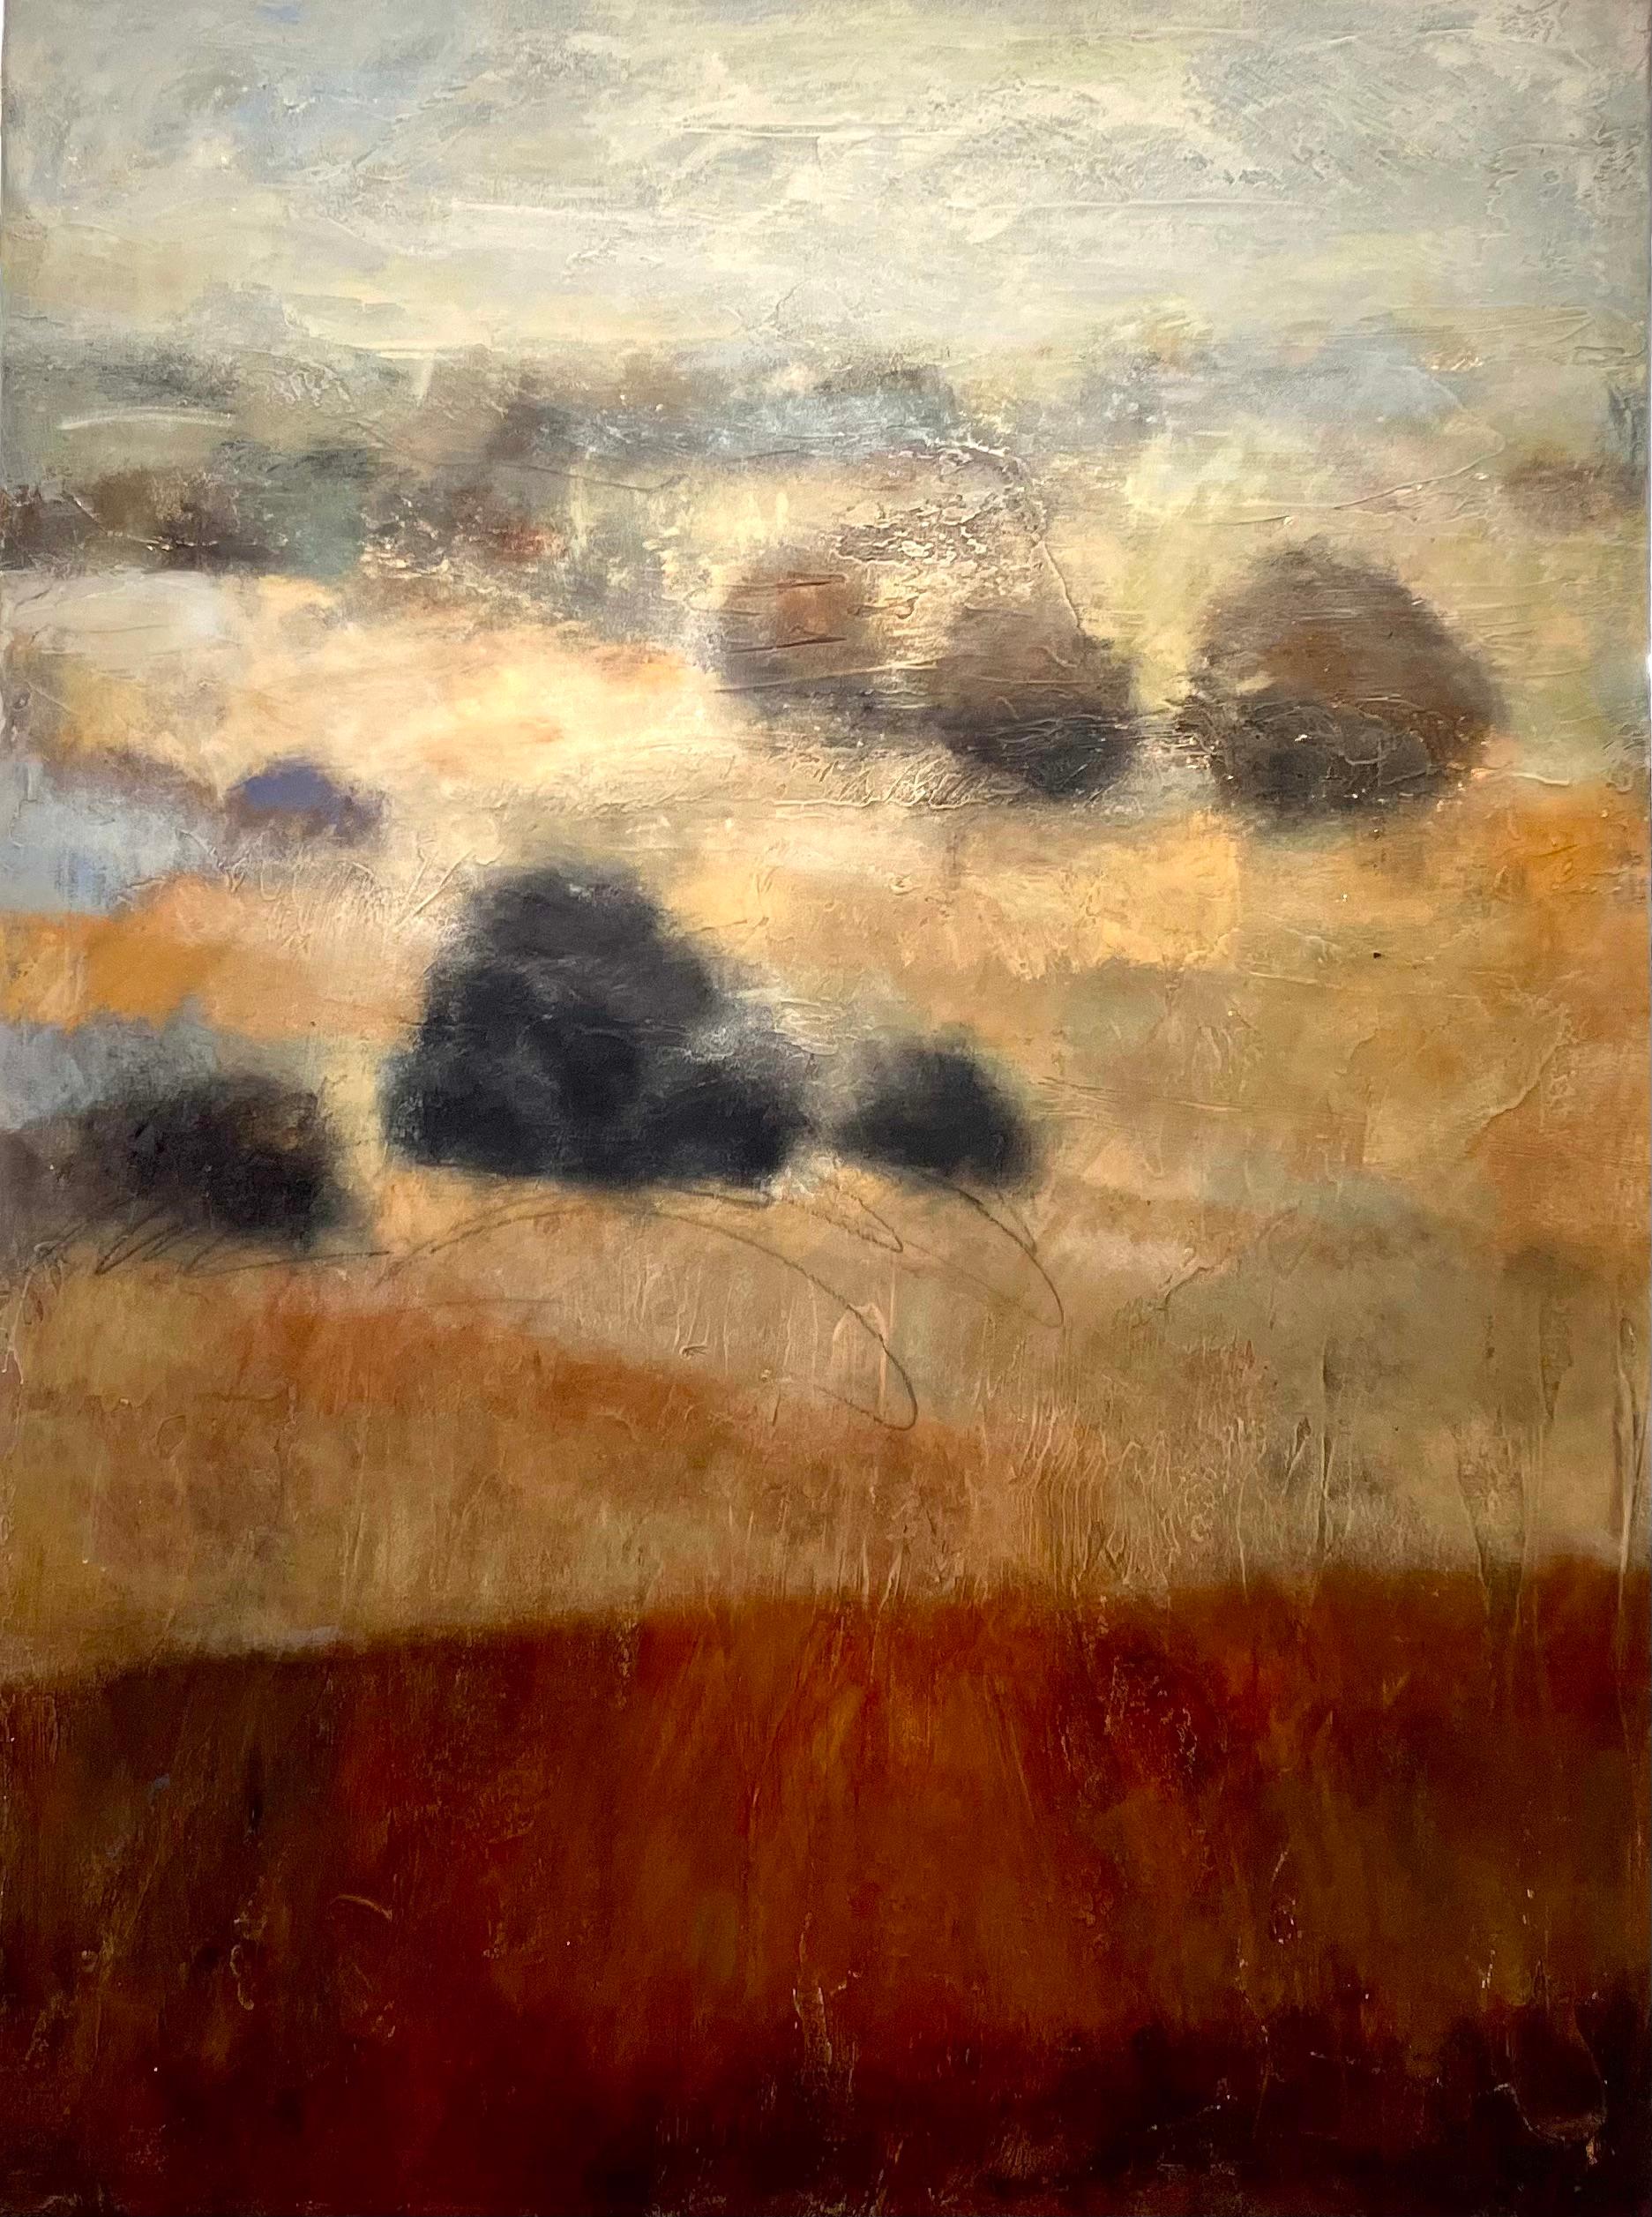 Helen Steele Abstract Painting - "Serene Plains" Mixed Media Contemporary Landscape Abstract Expressionist